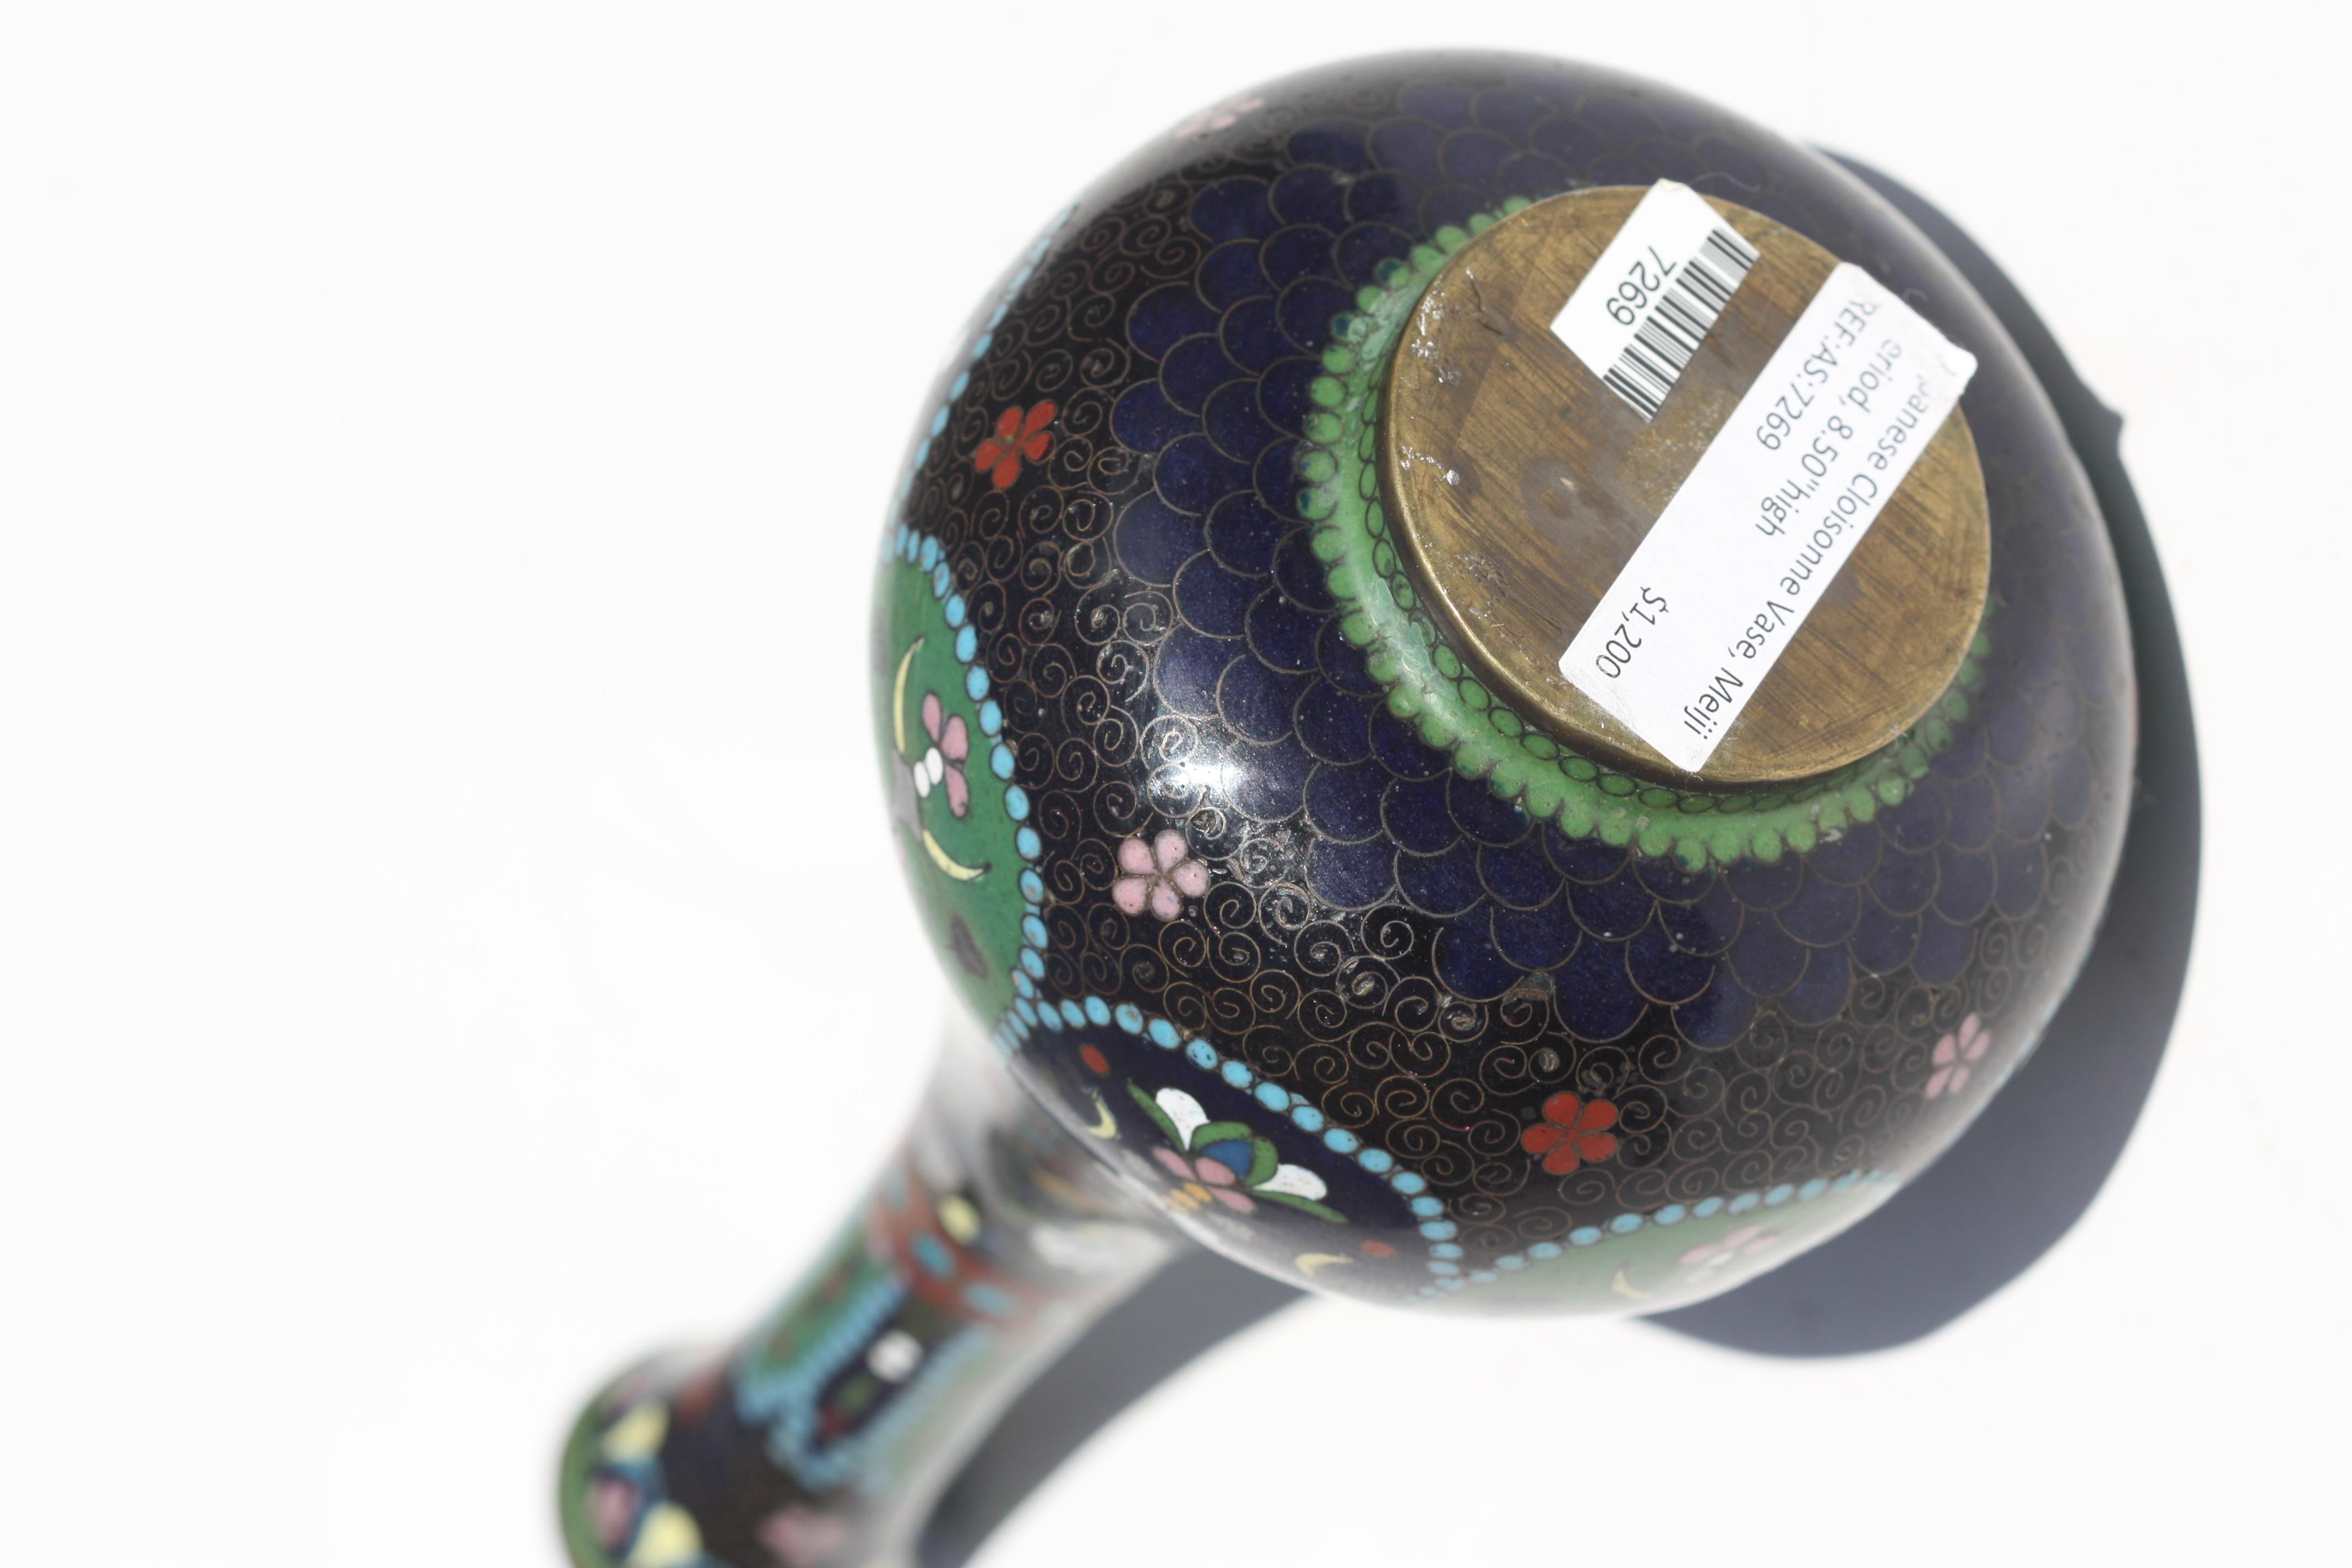 Japanese Cloisonne Enamel Vase 19th Century In Good Condition For Sale In West Palm Beach, FL